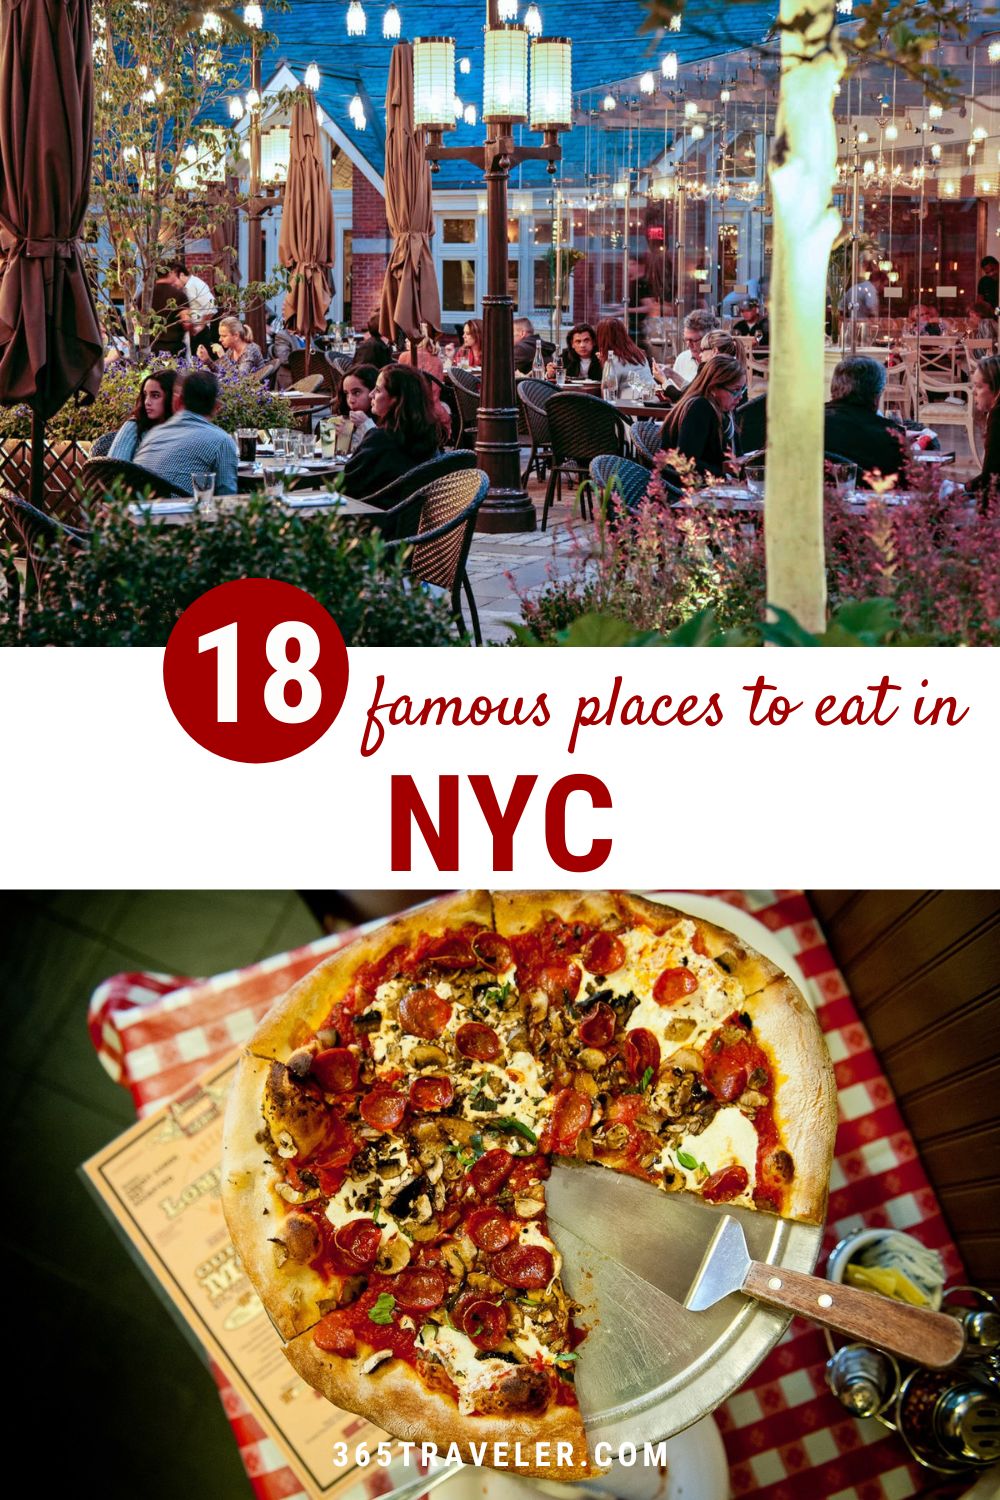 18 Famous Places To Eat in NYC You Can’t Miss